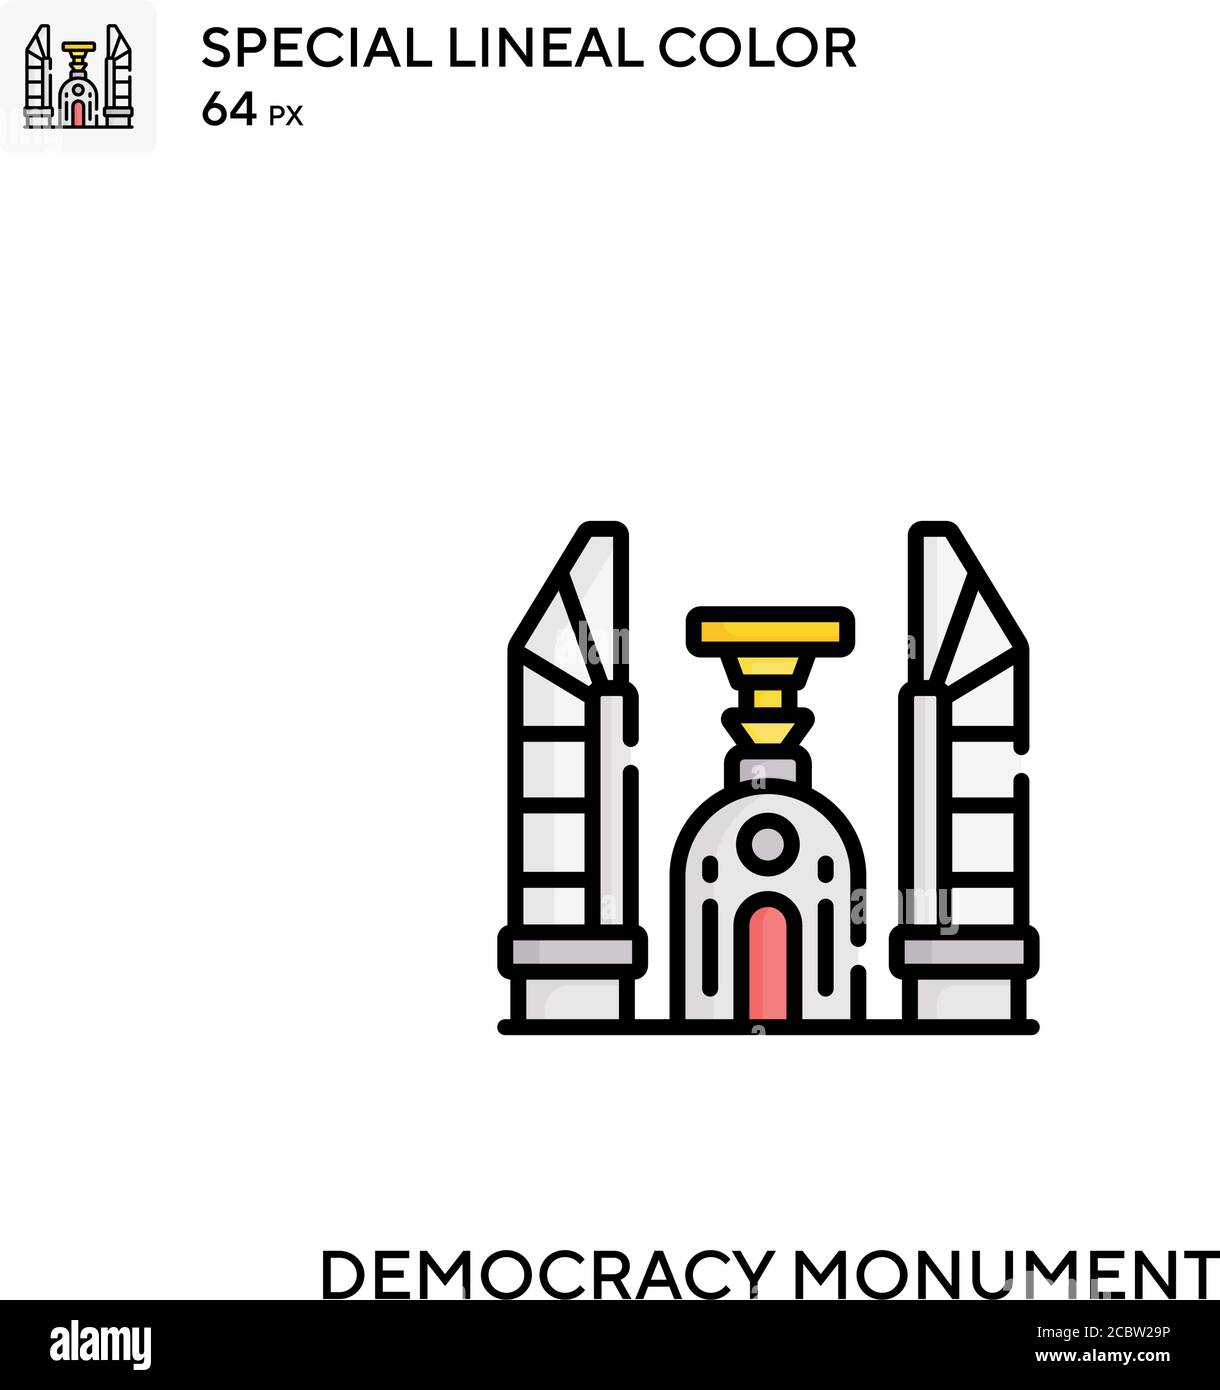 Democracy monument Special lineal color vector icon. Democracy monument icons for your business project Stock Vector